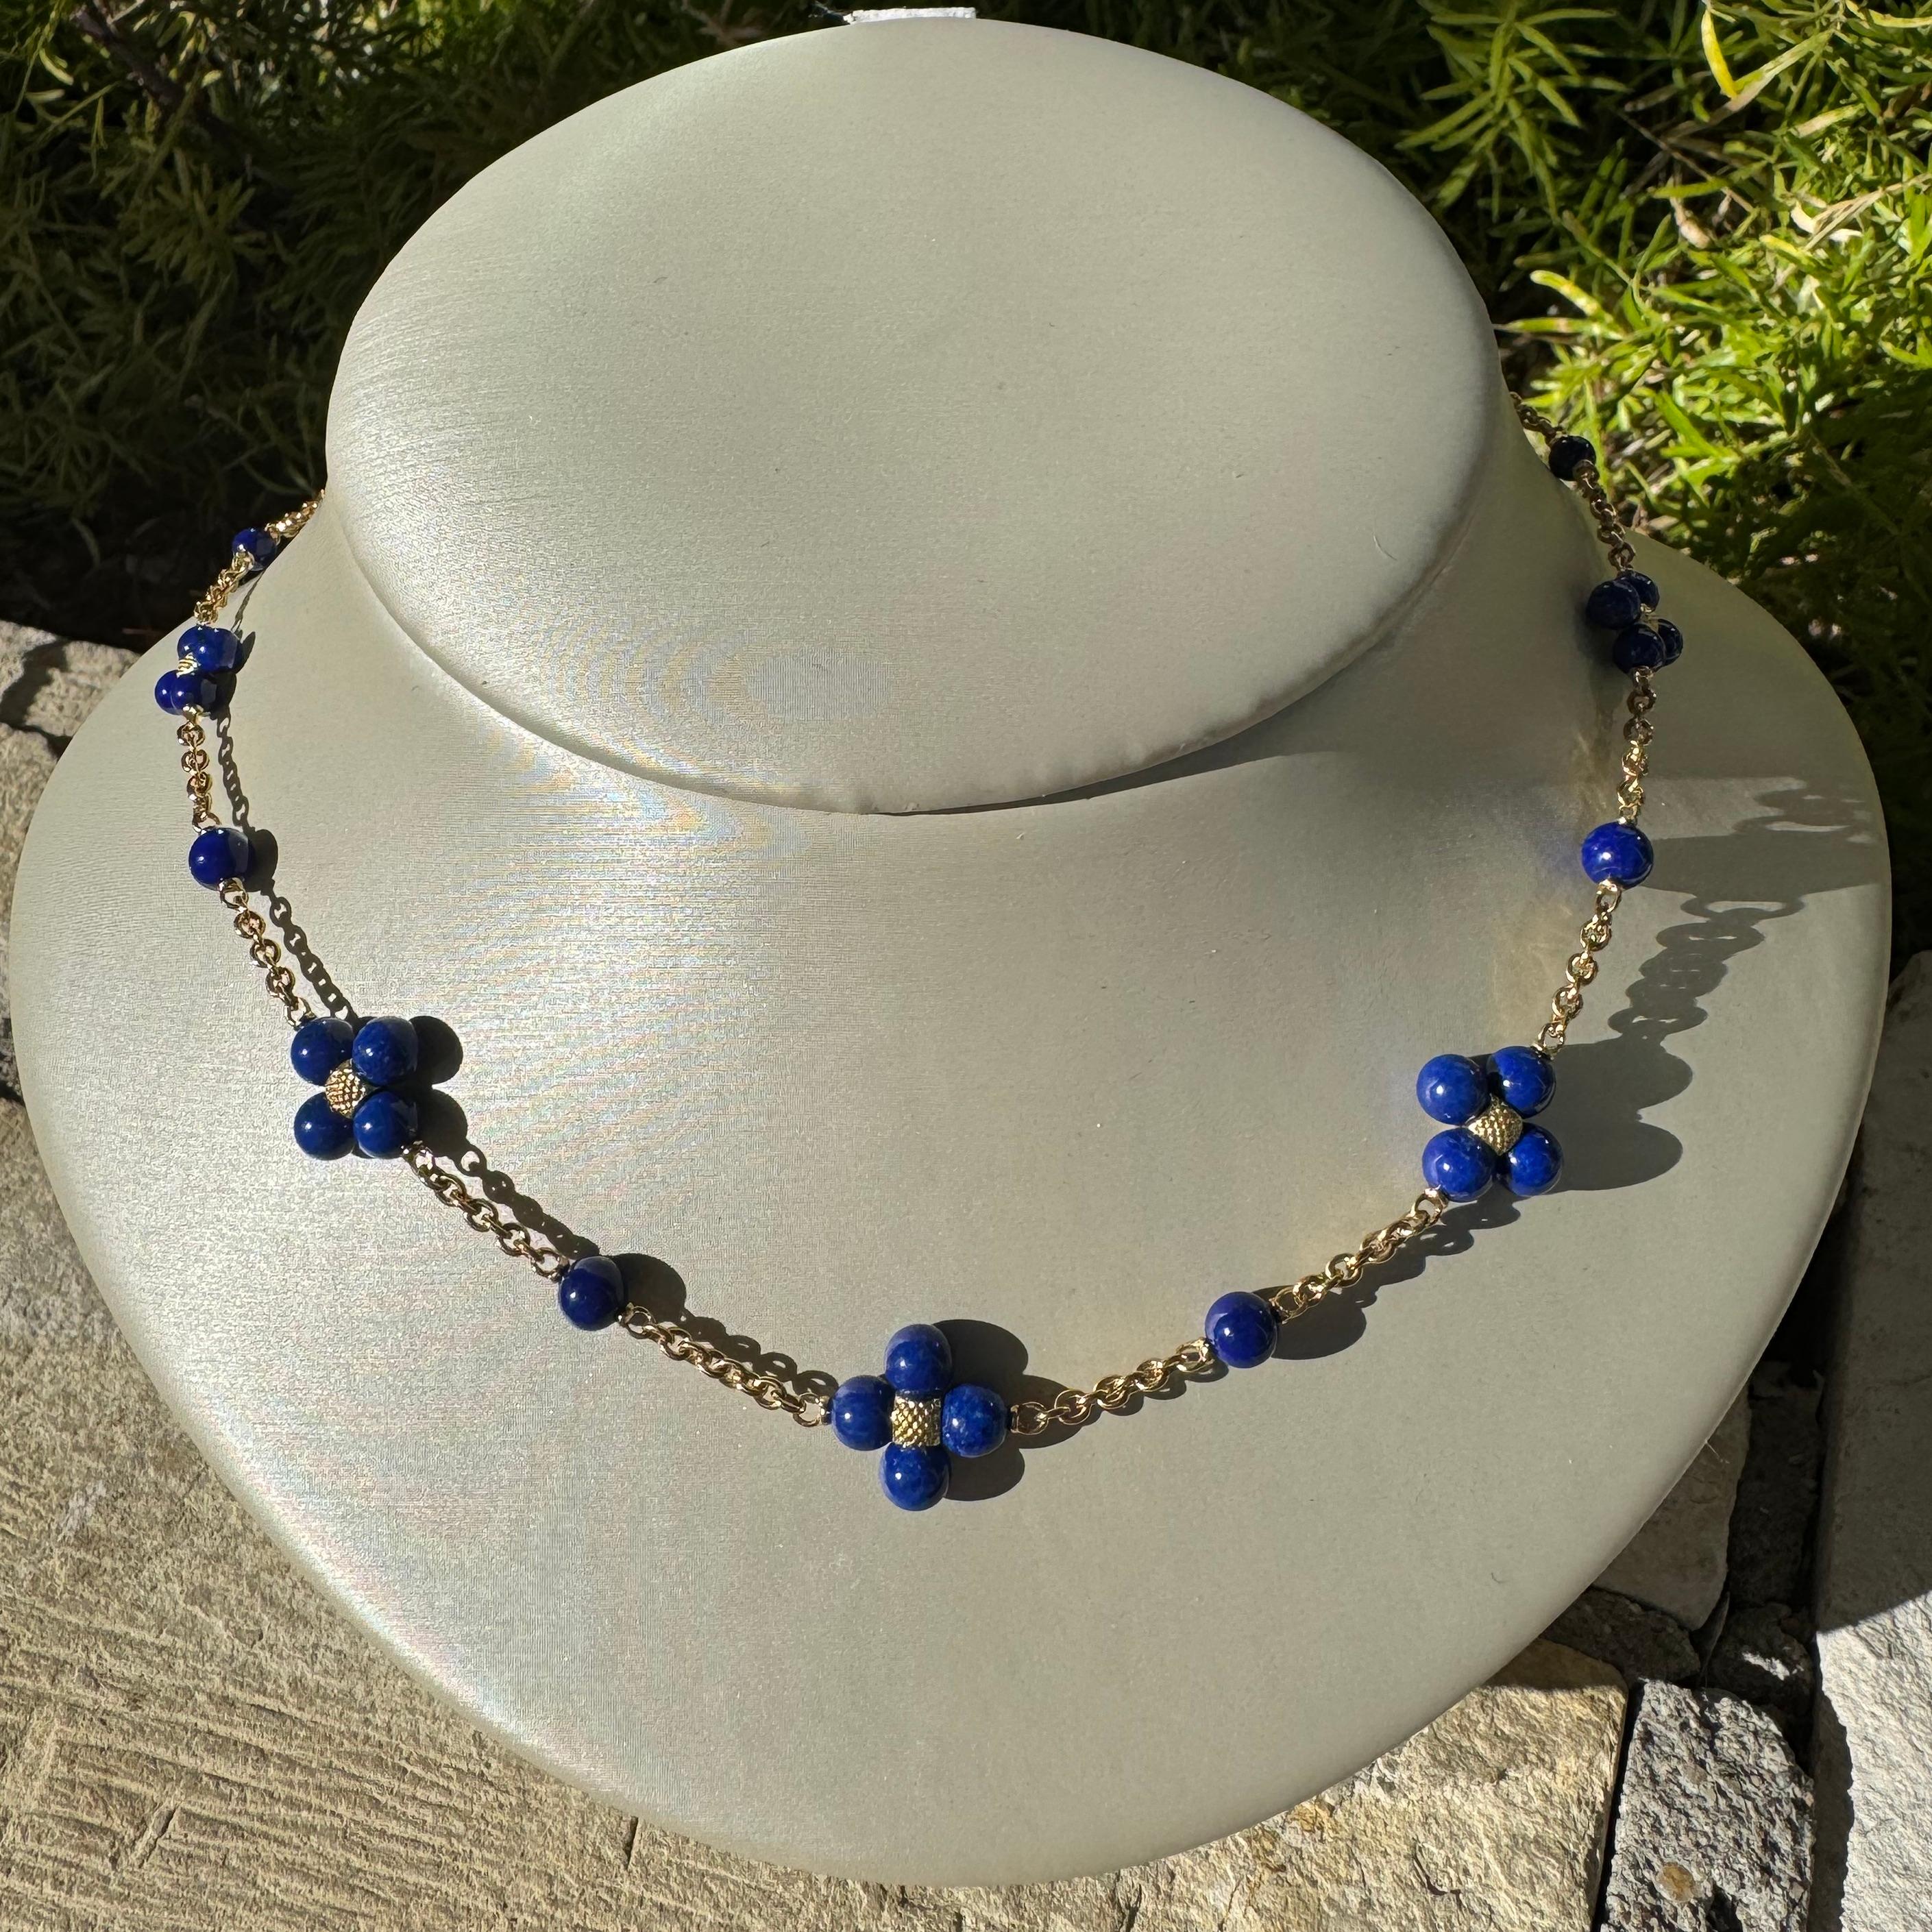 Make an elegant entrance statement in this Paul Morelli Sequence necklace. Exquisitely elegant, this delicate gold chain is adorned with an orbit of round Lapis clusters. Create lasting memories with this radiant piece and add to your collection